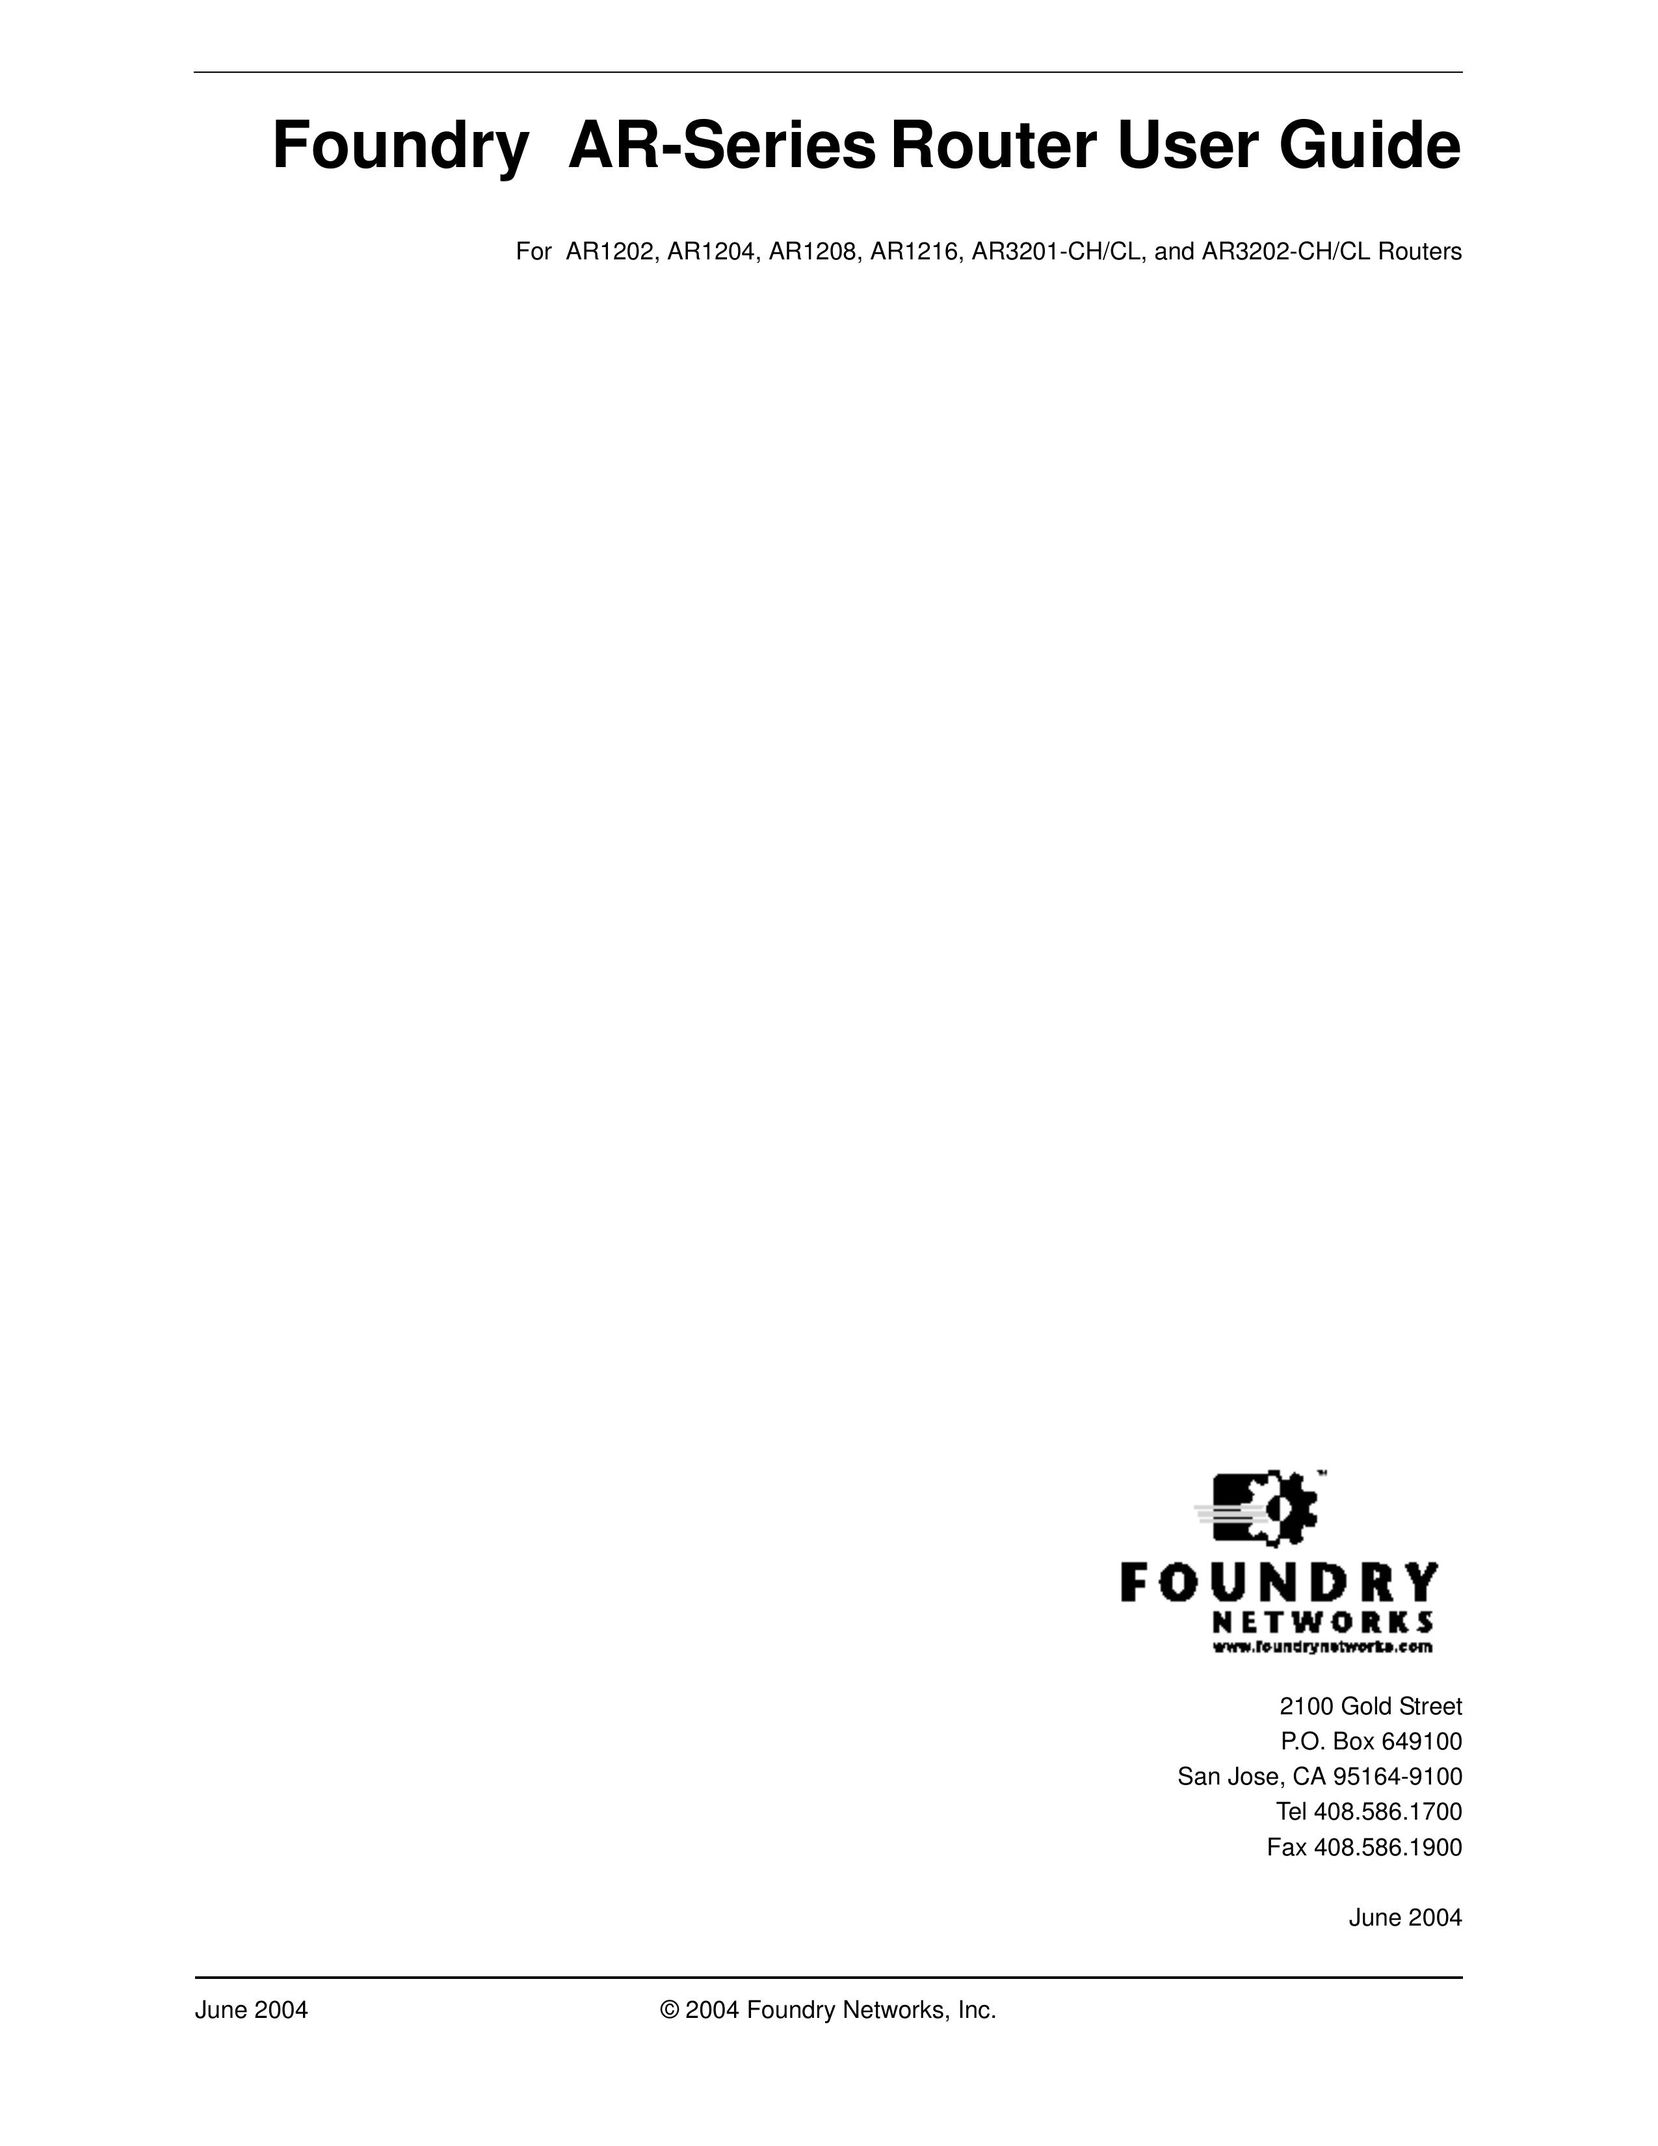 Foundry Networks AR3202 Network Router User Manual